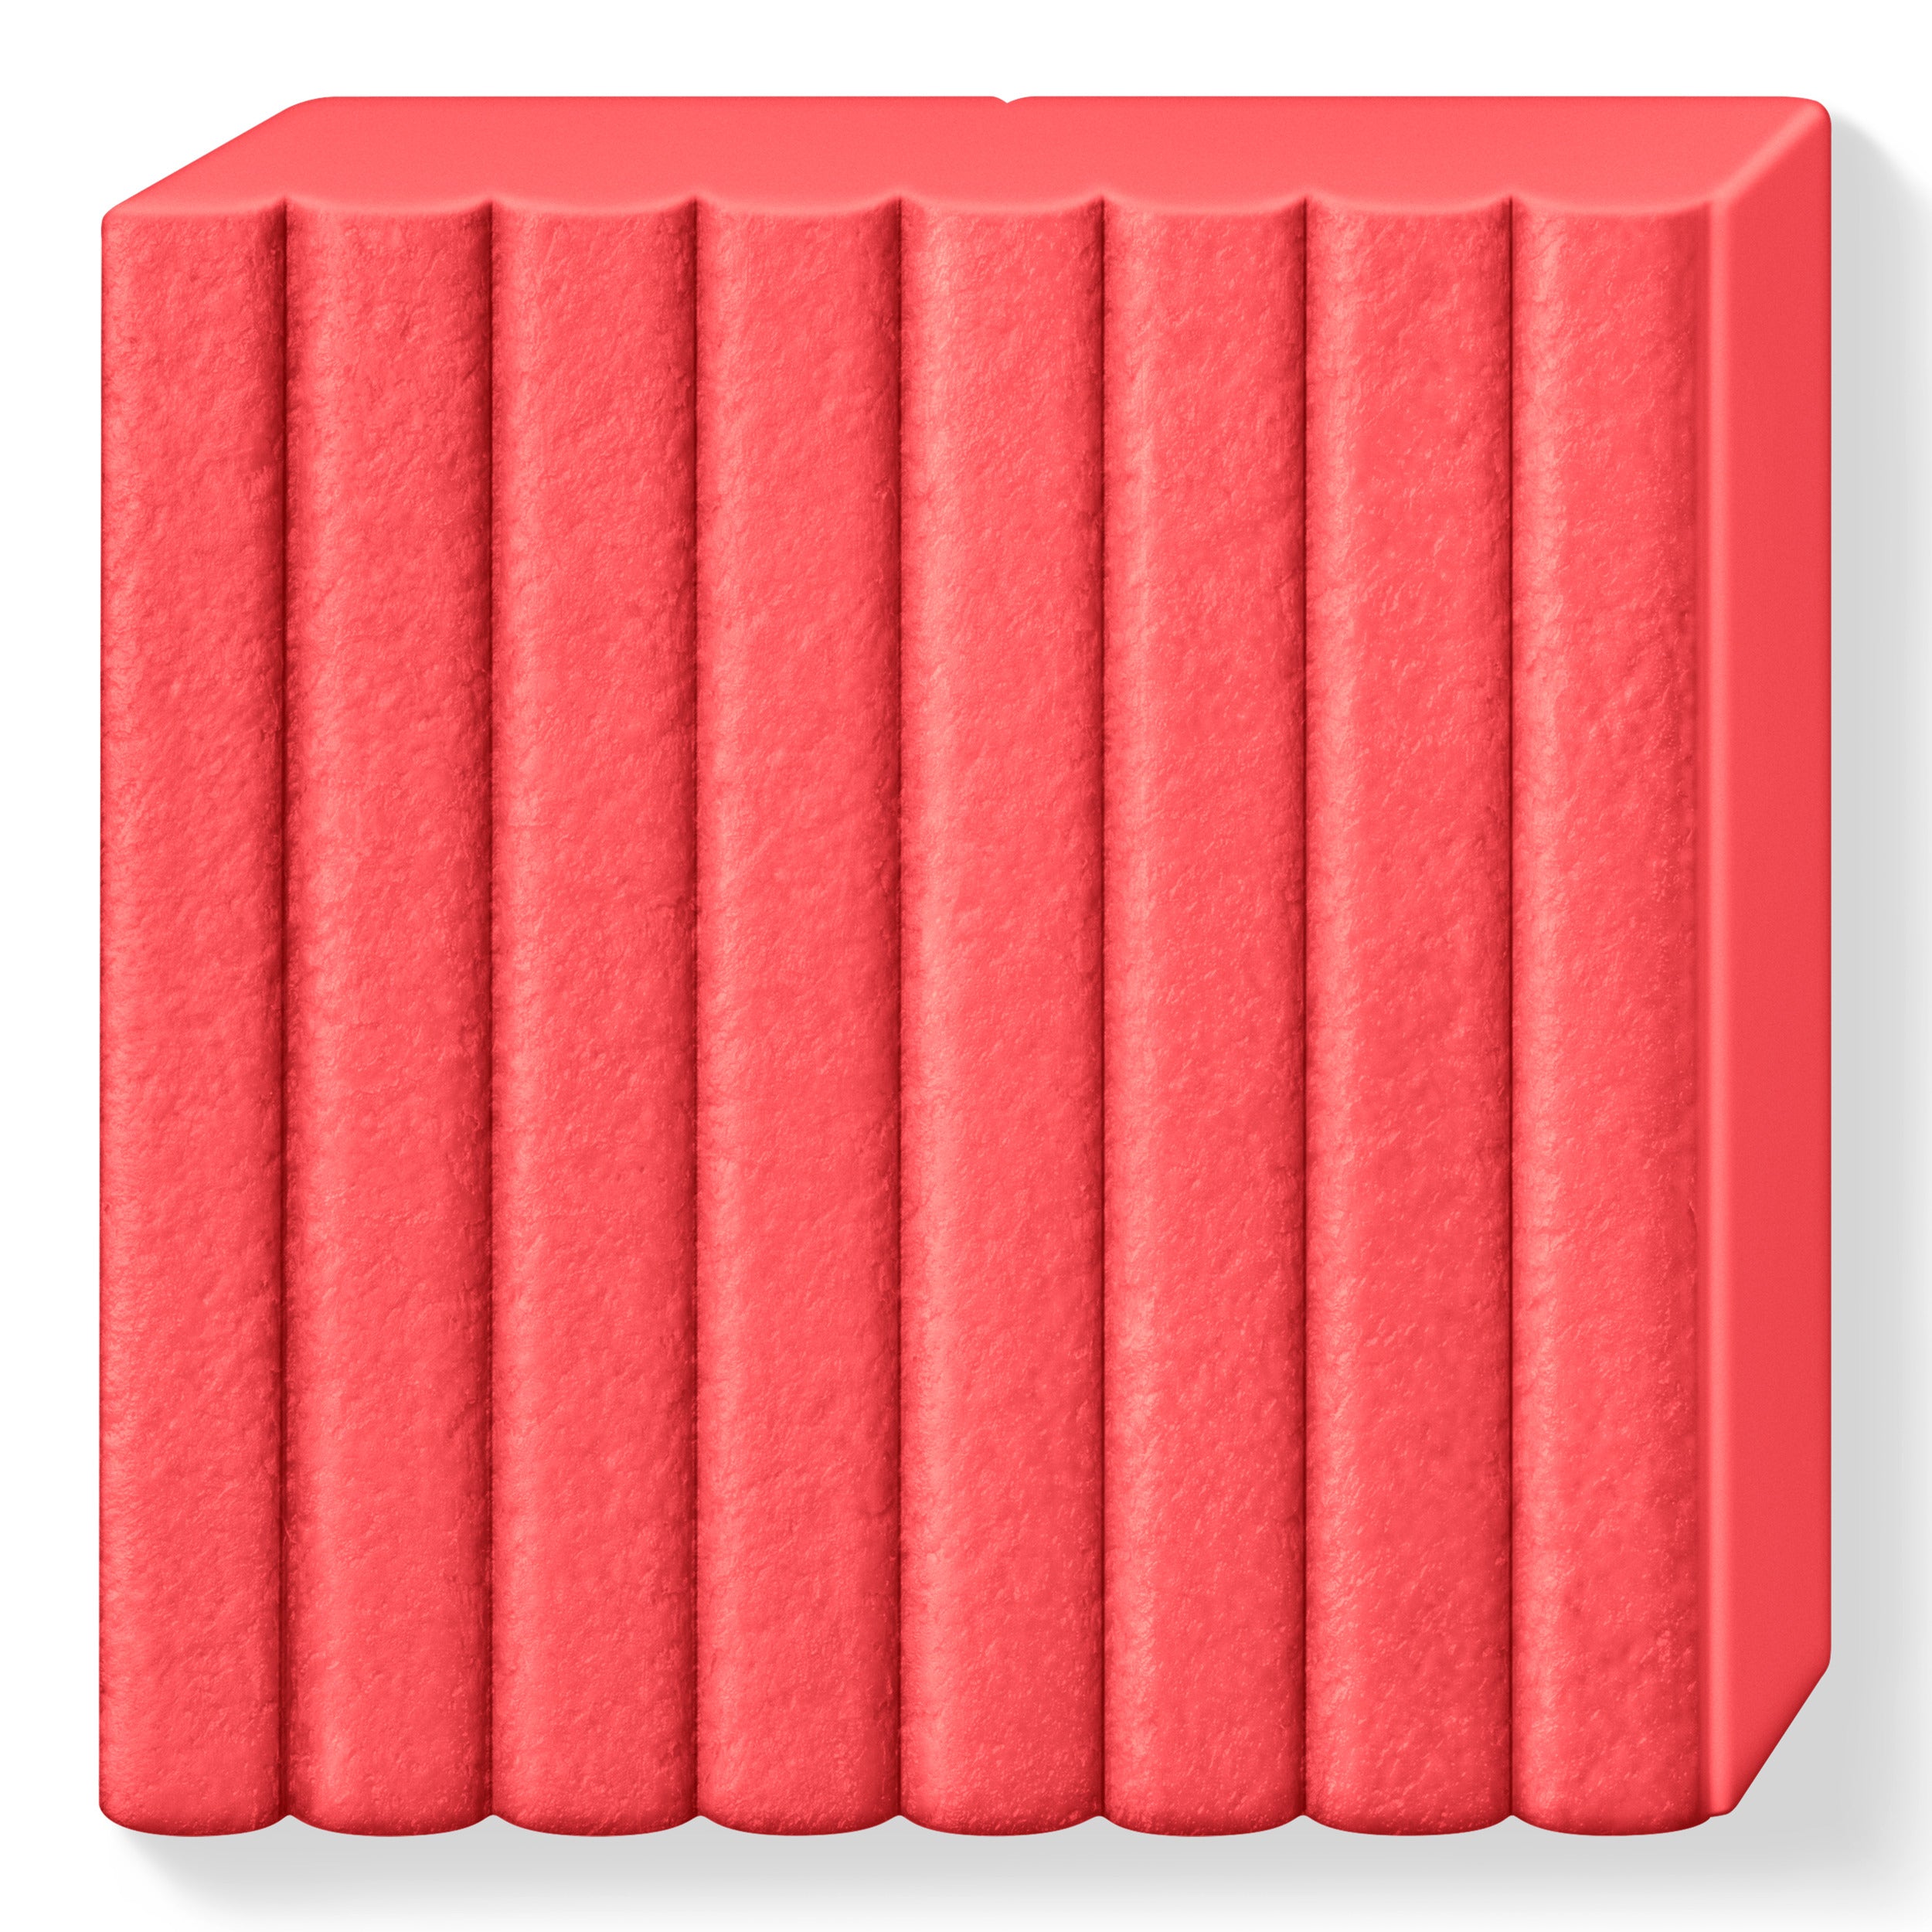 Fimo Leather Effect Polymer Clay Standard Block 57g (2oz) - Watermelon